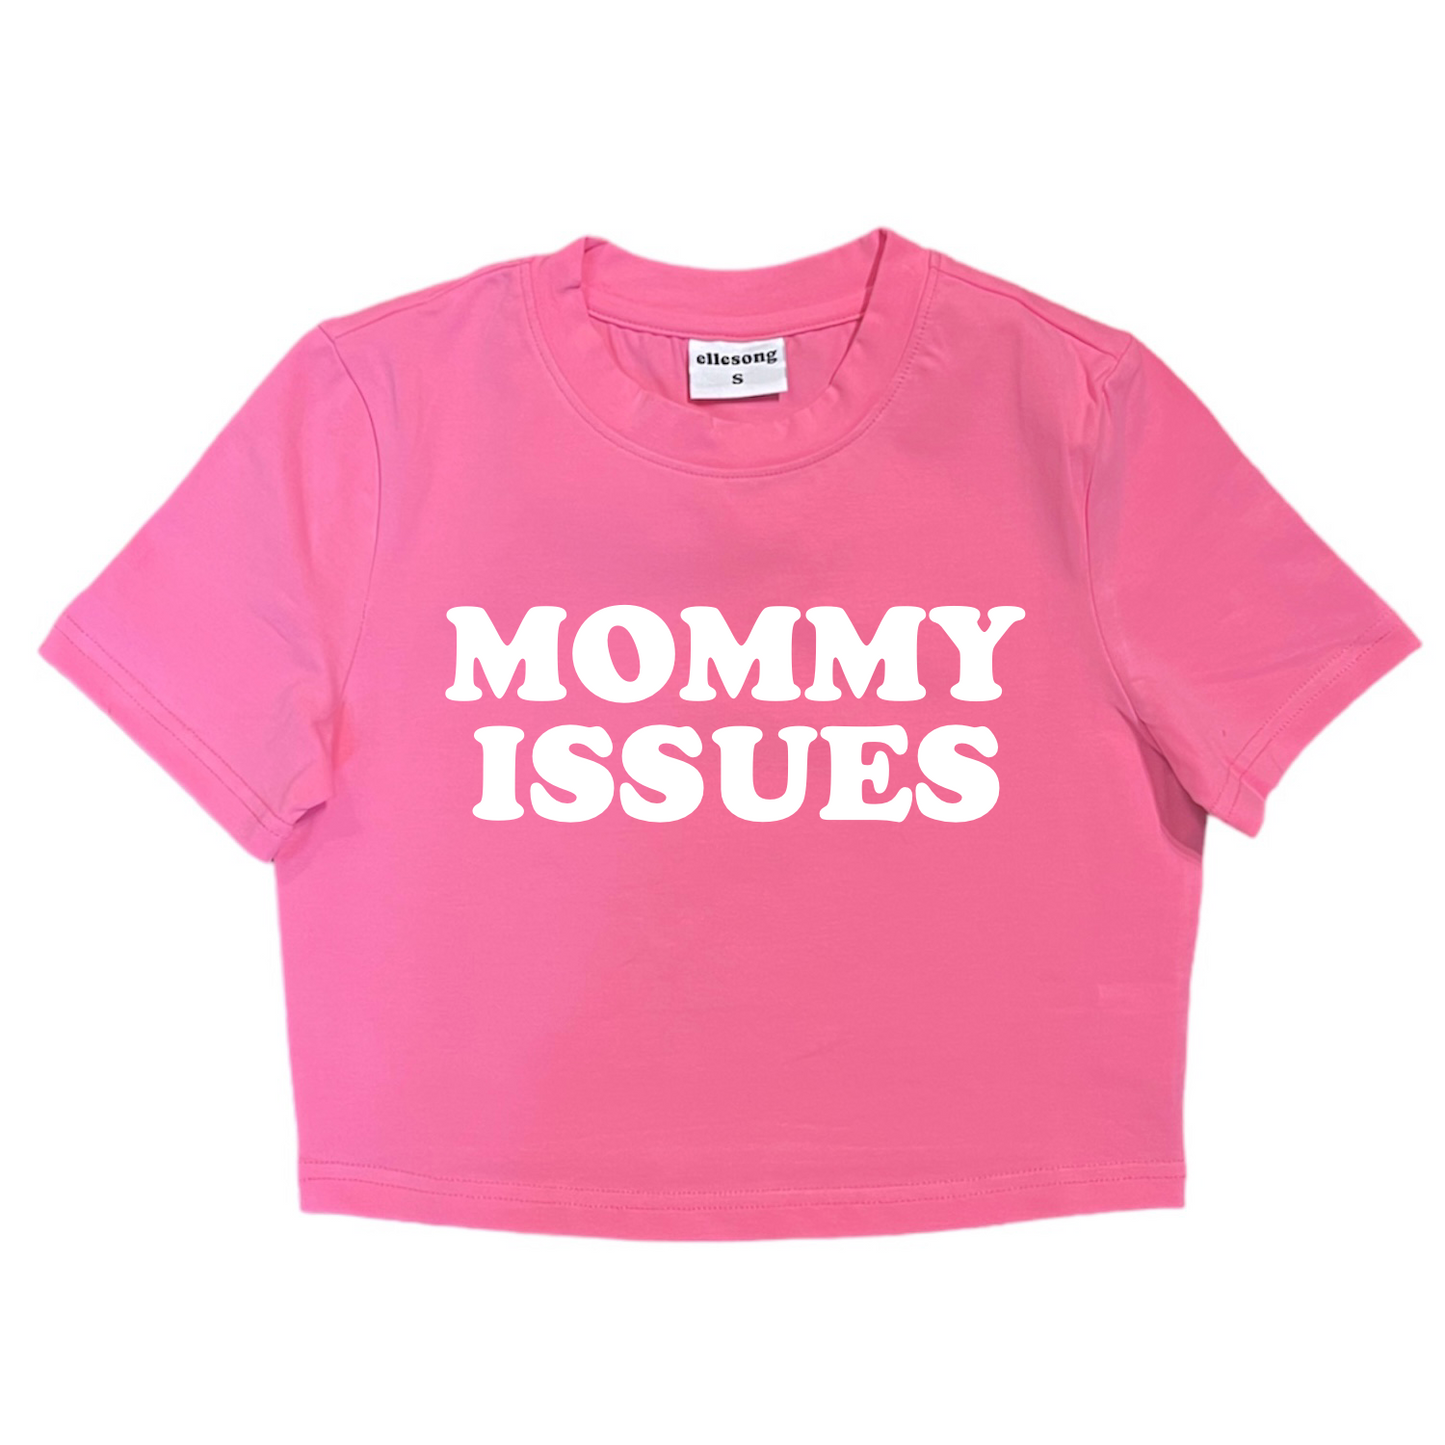 Mommy Issues Baby Tee